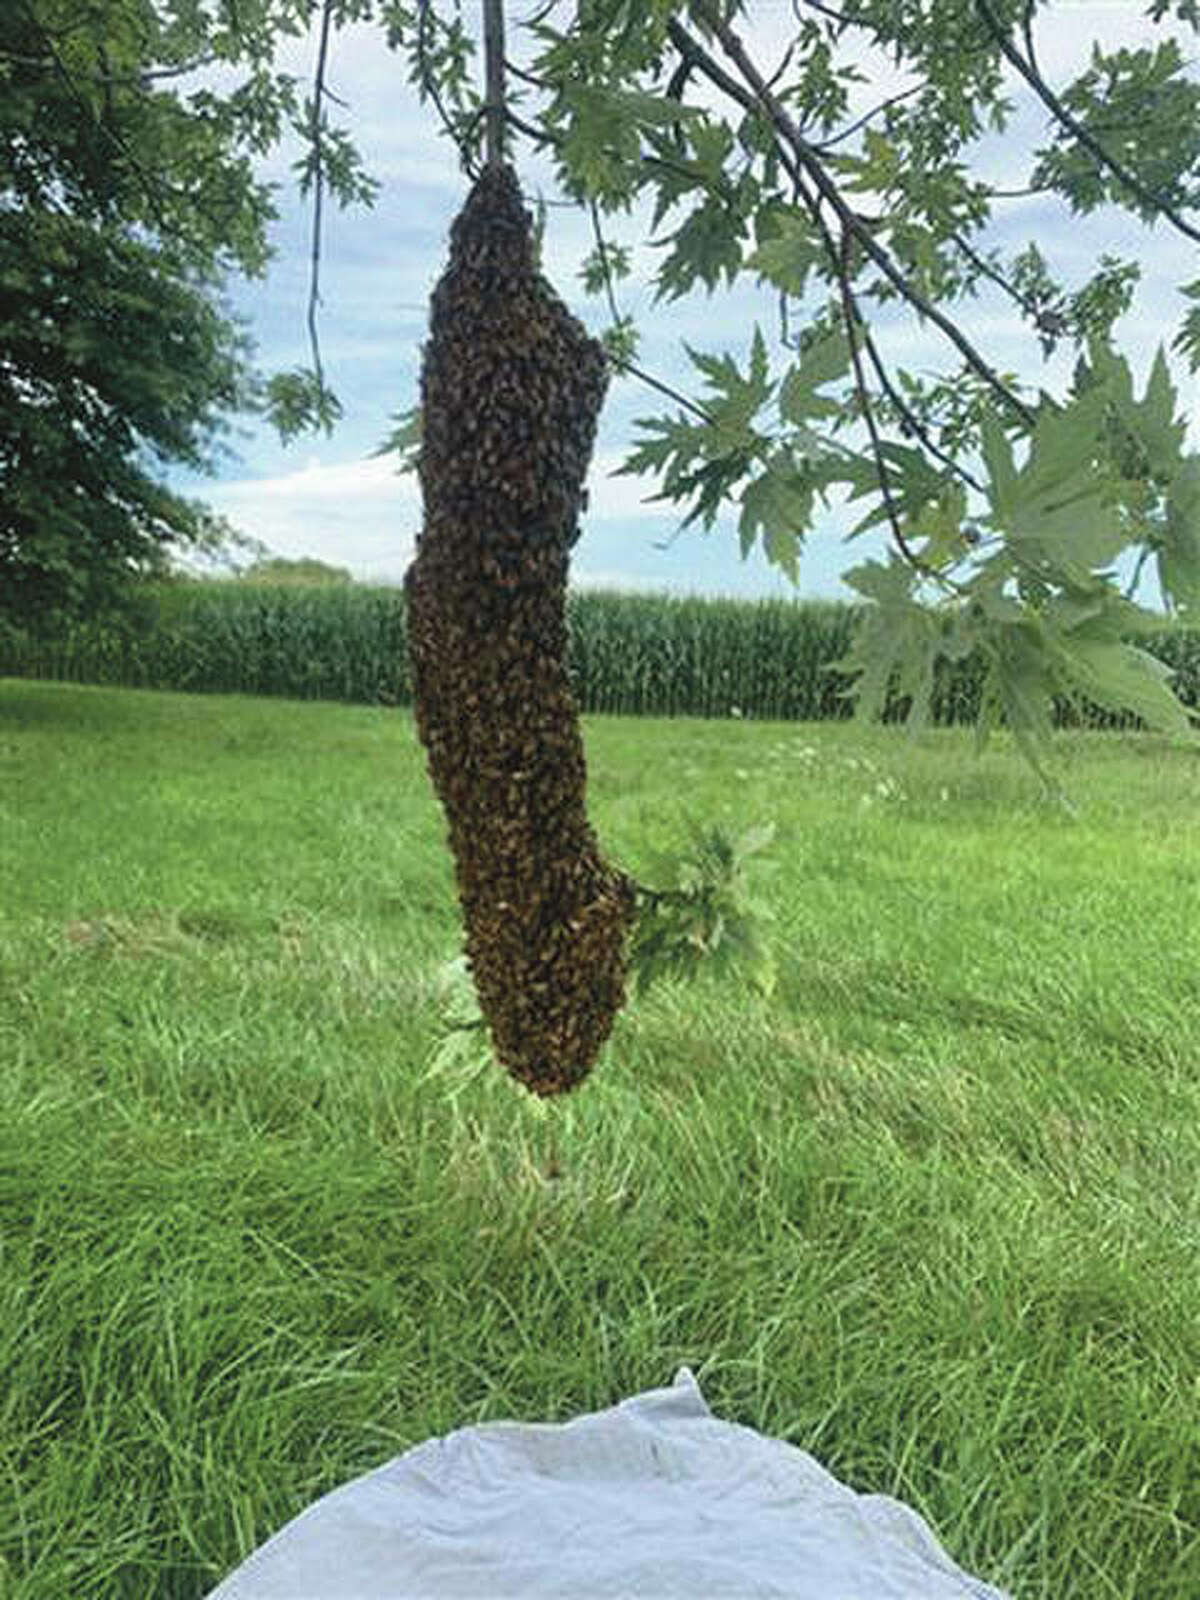 A large swarm of bees drops down from a tree south of White Hall.